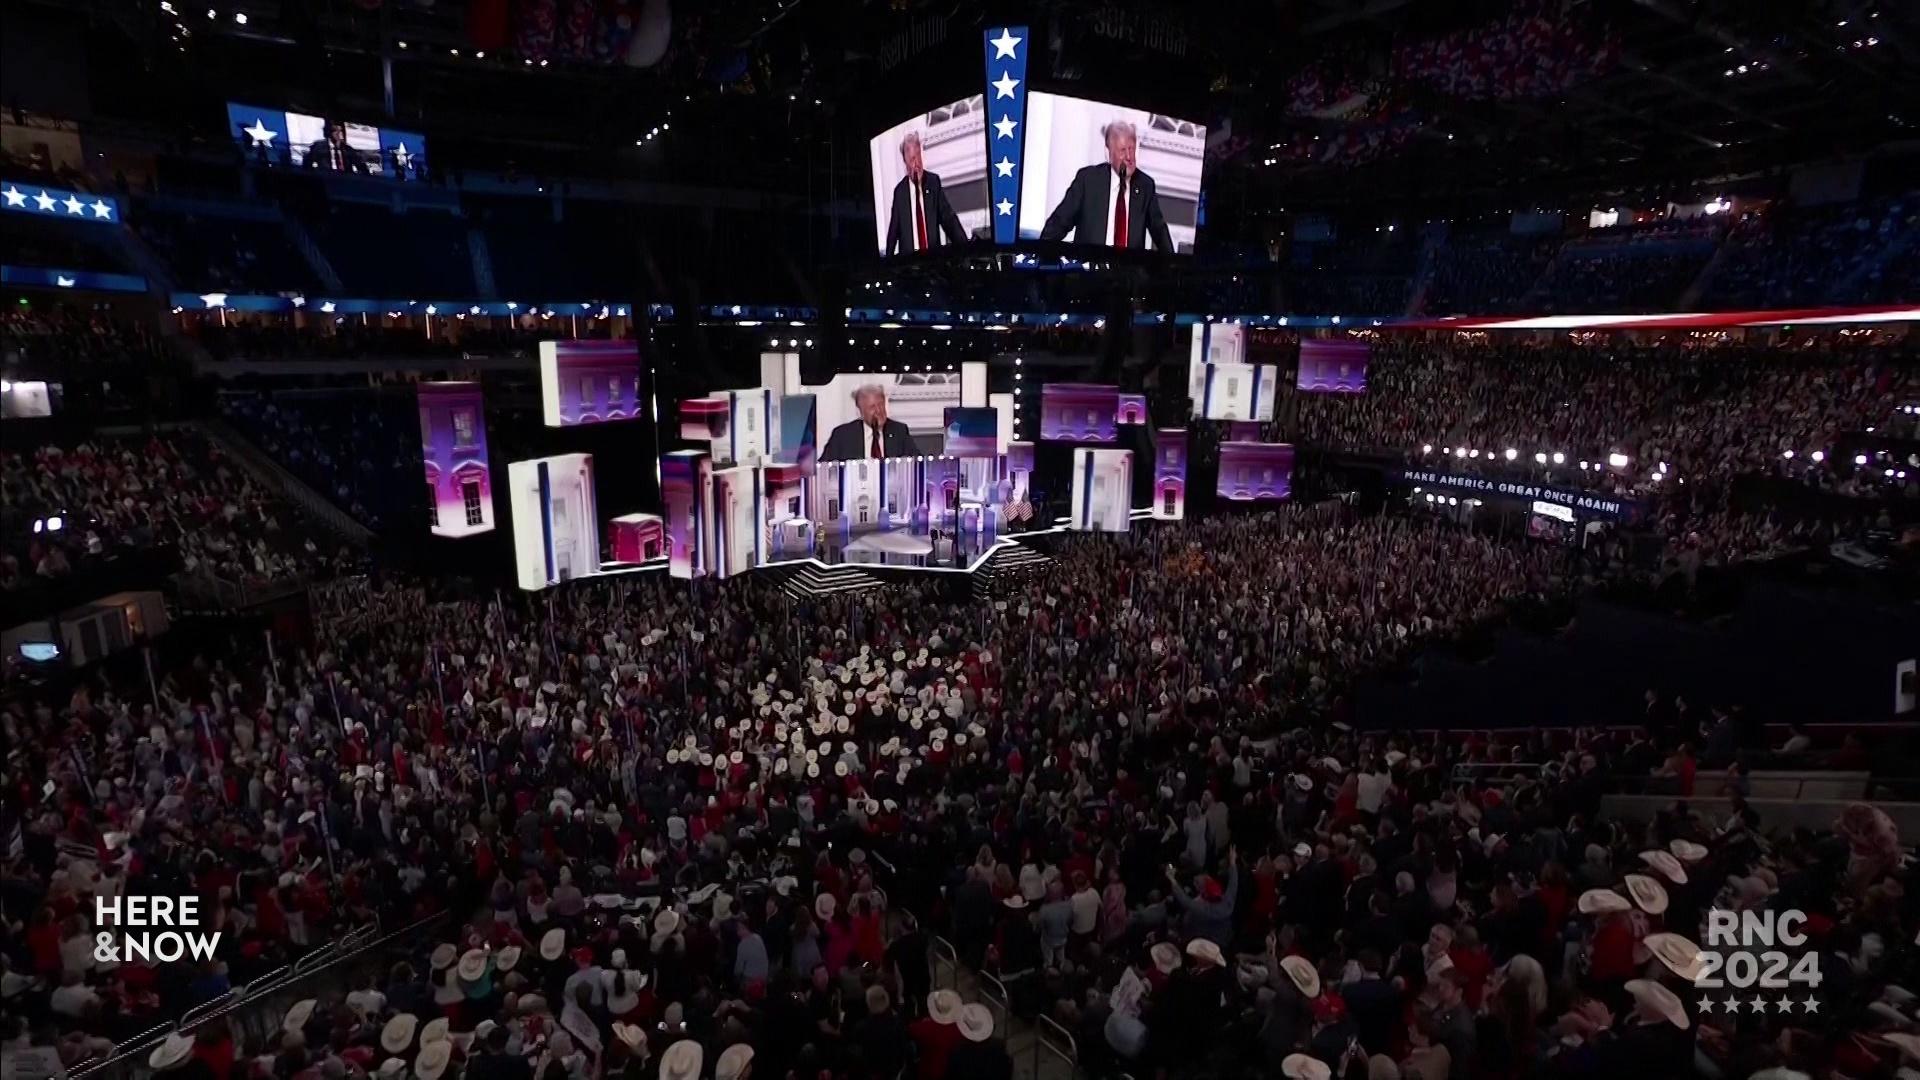 Multiple screens depict Donald Trump standing on a stage and speaking into a microphone.